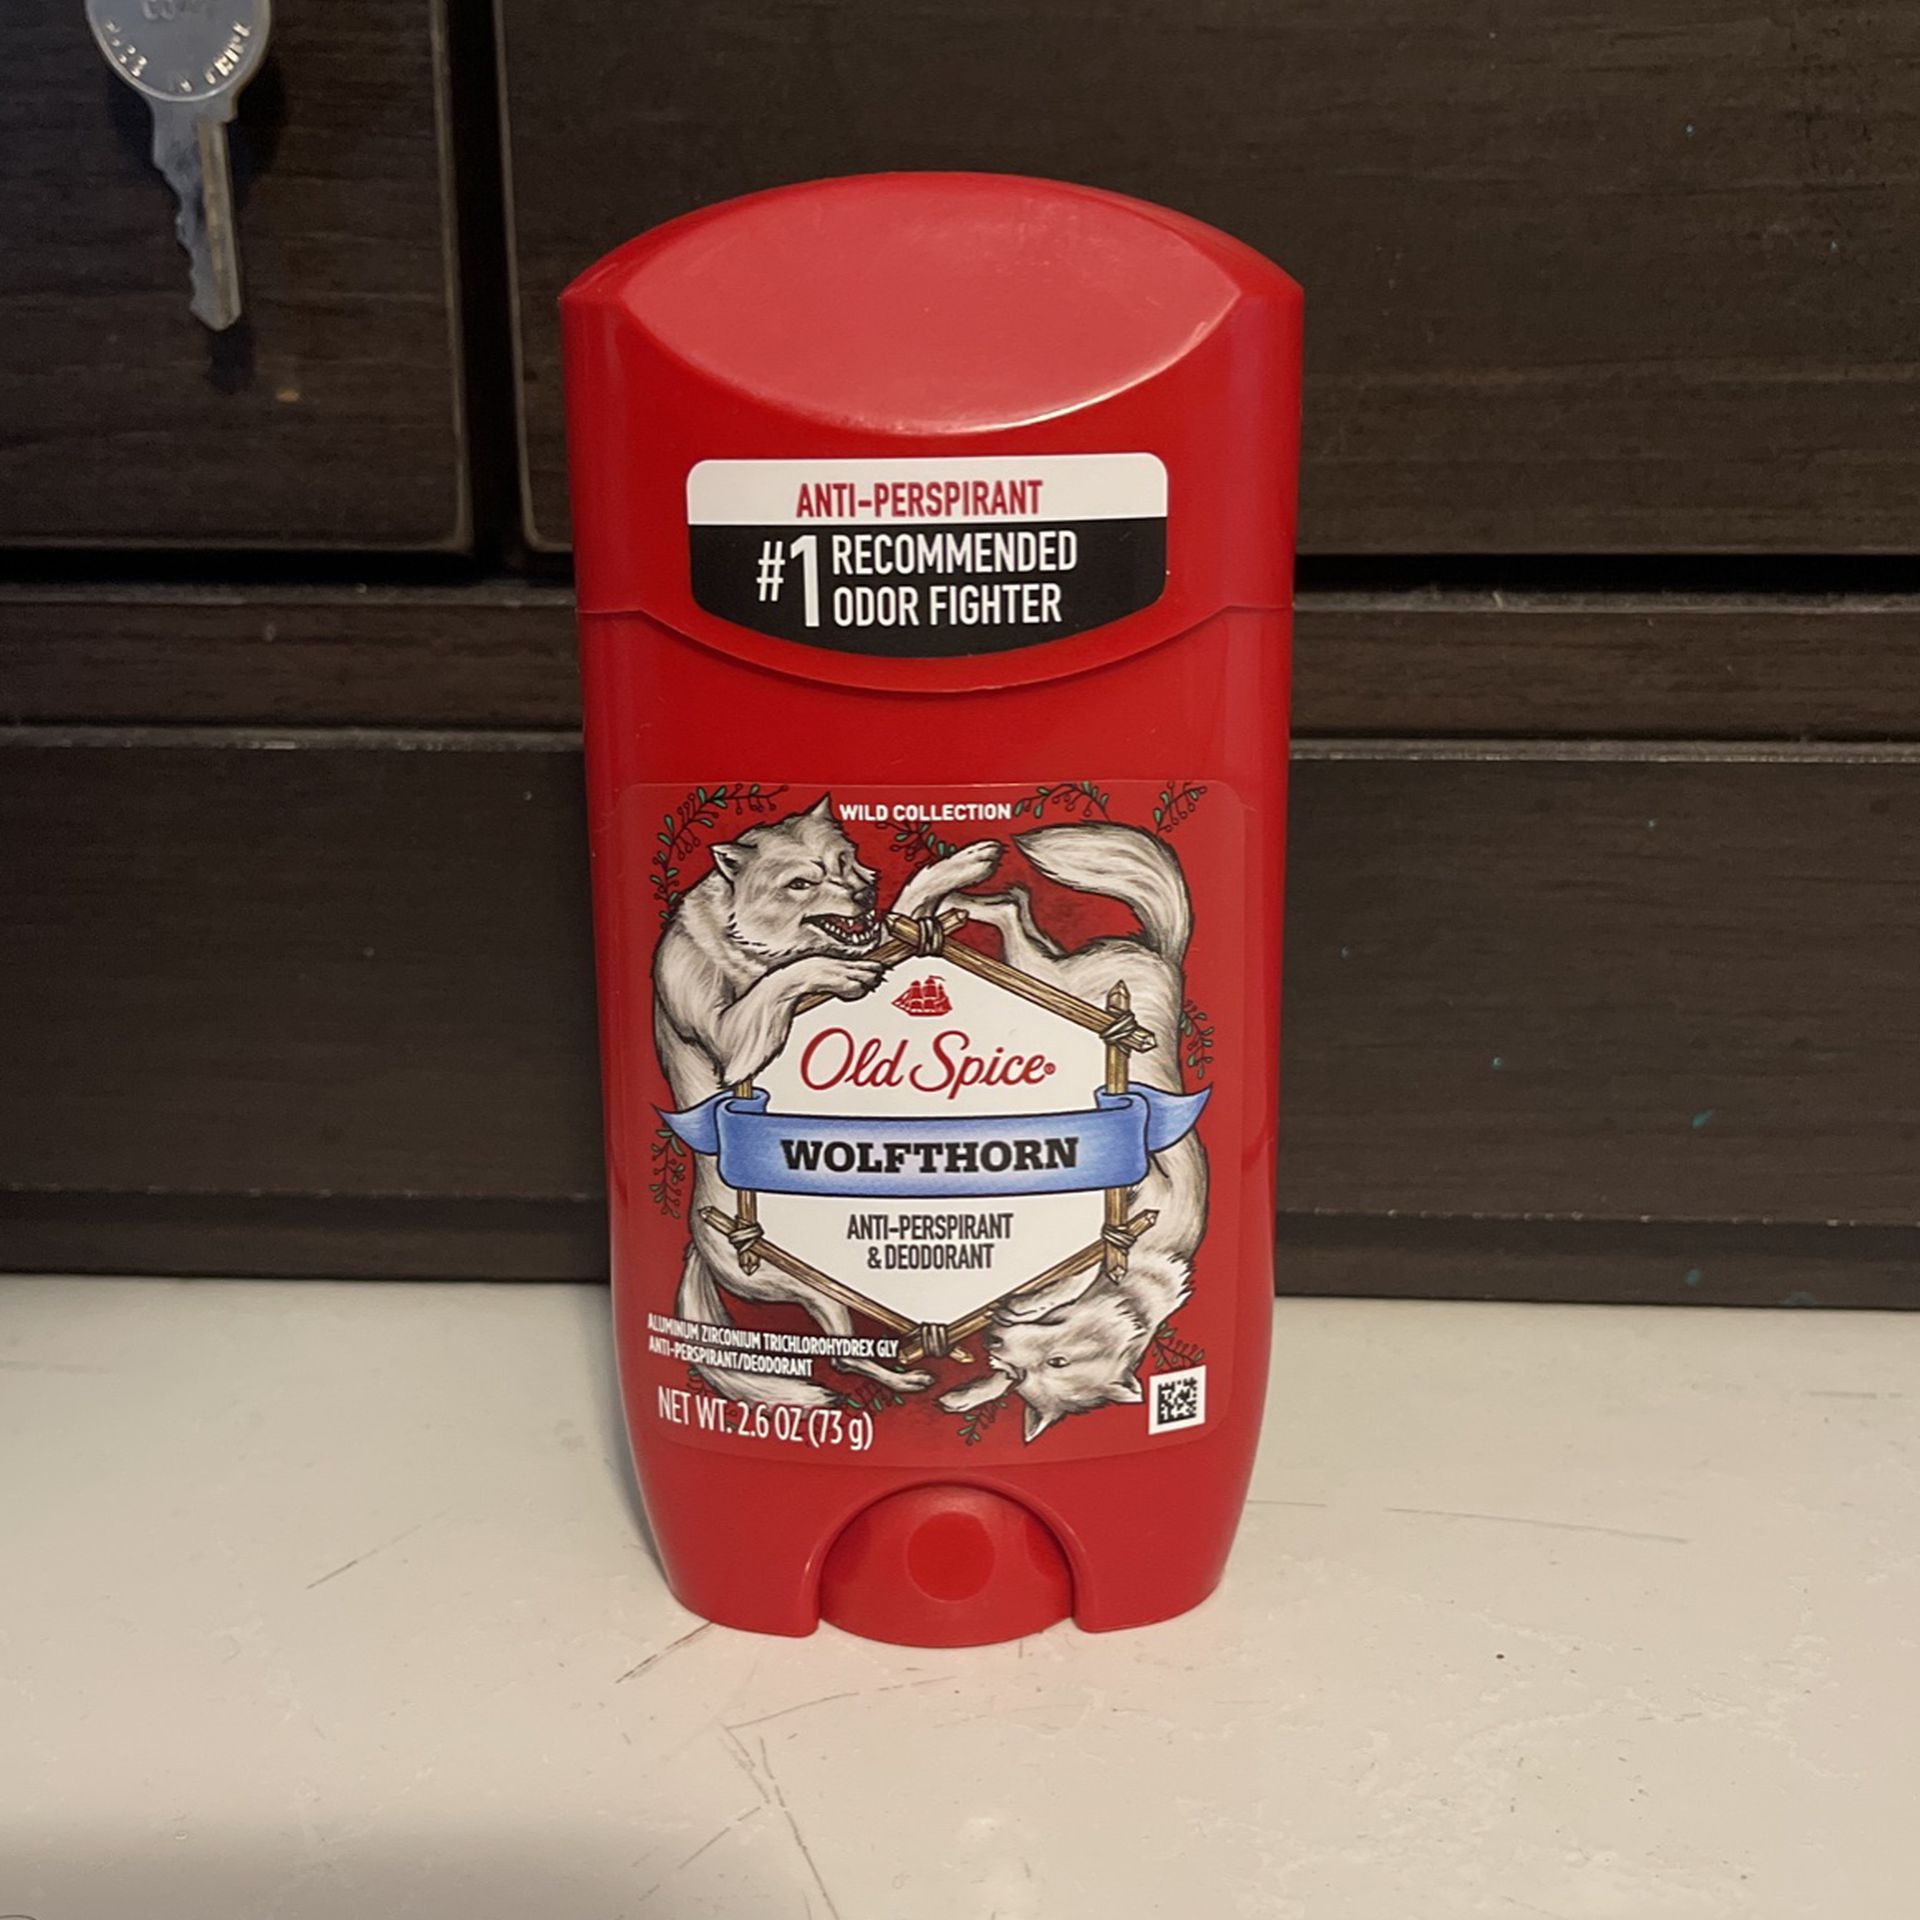 Old Spice Wolfthorn Deodorant $4 